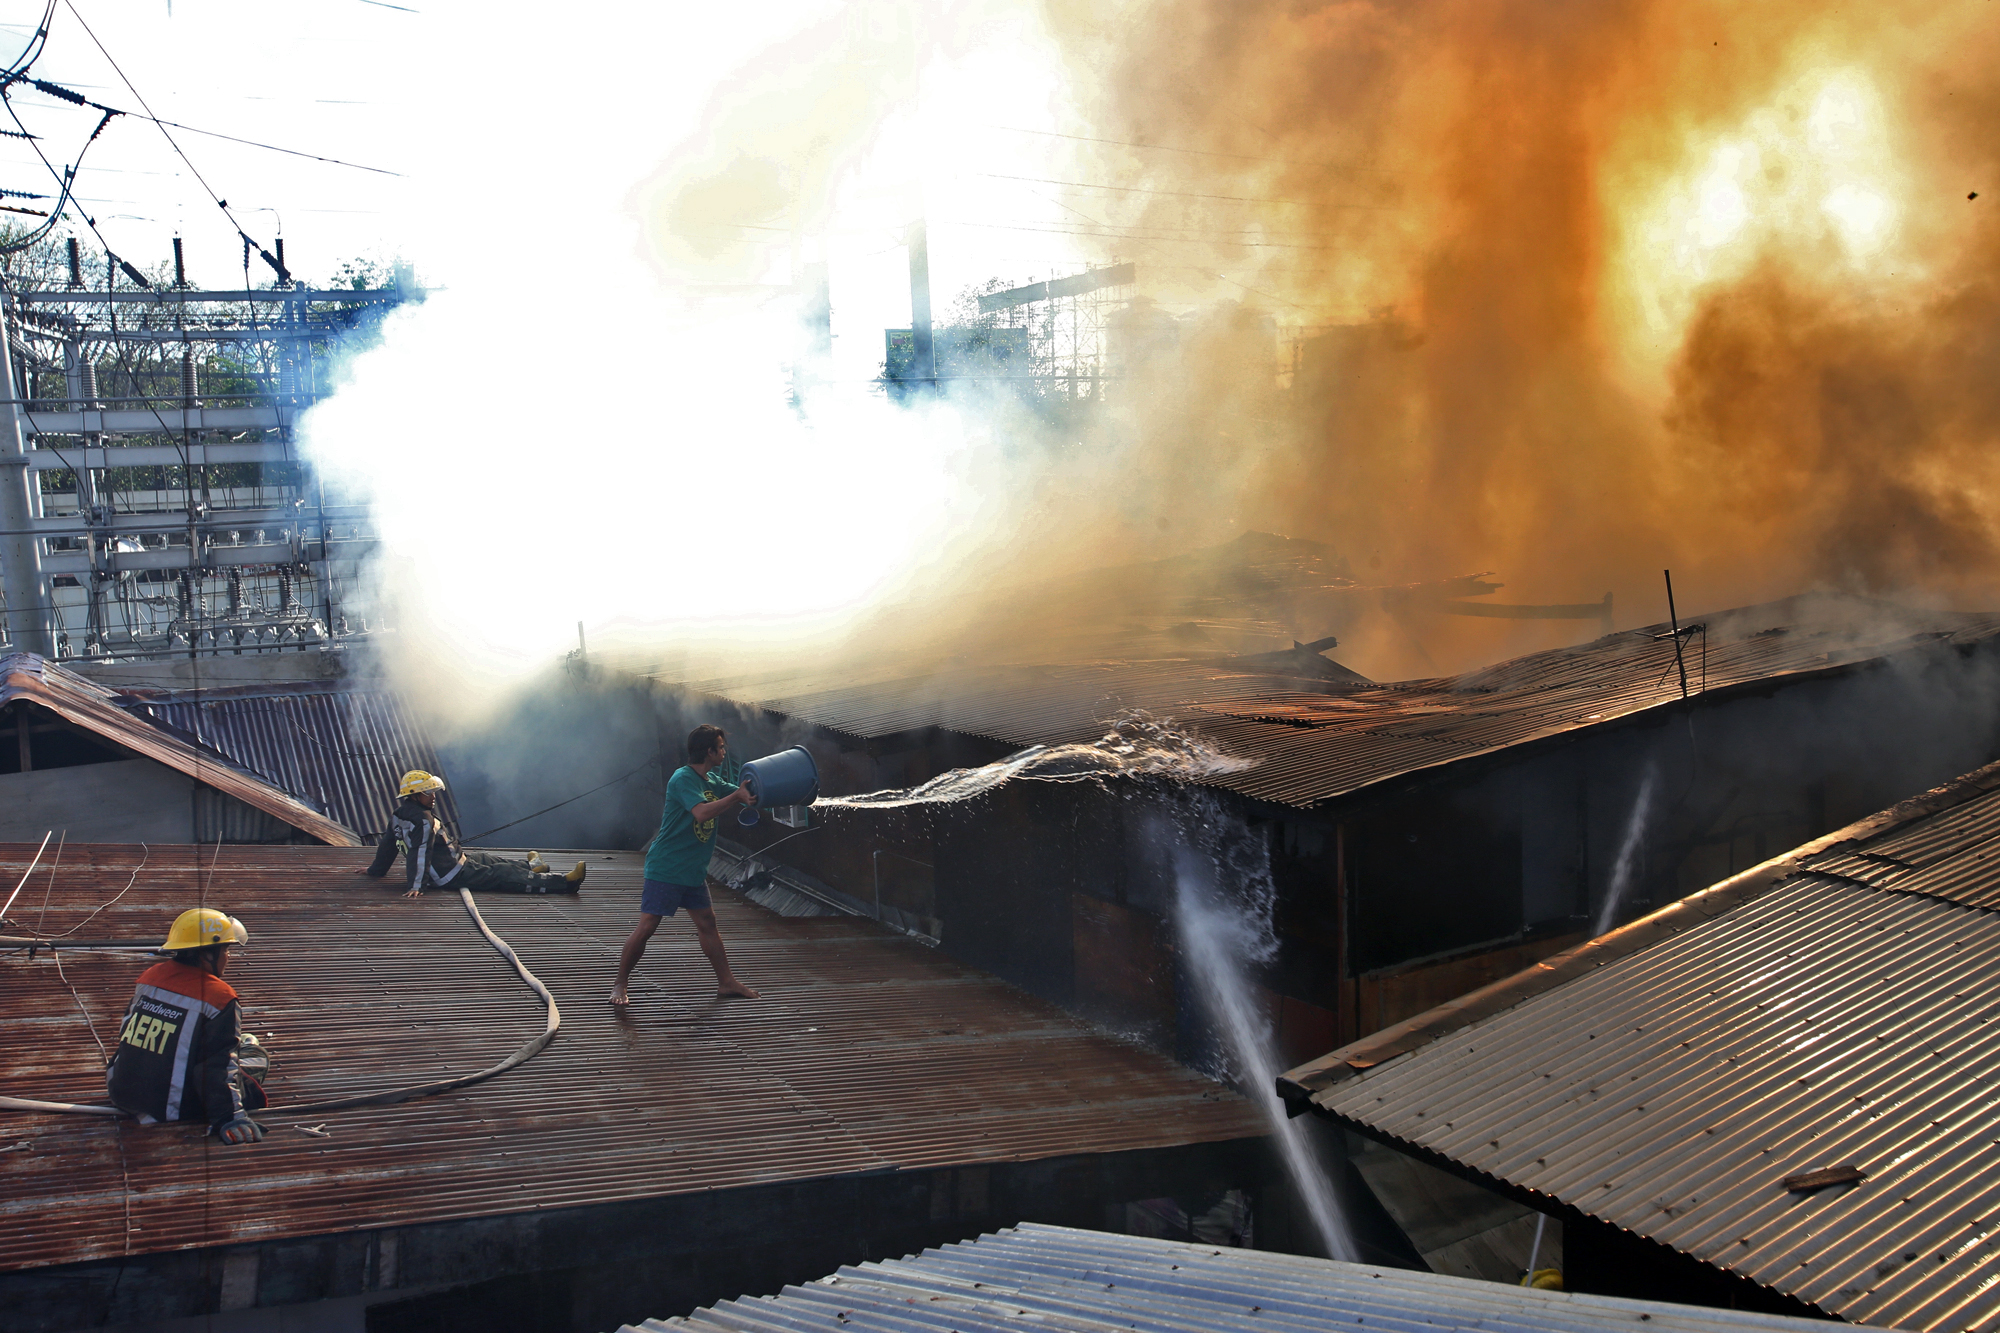 A resident of barangay Lorega San Miguel throws a pail of water on a burning house while fire volunteers sit on the roof waiting for water pressure.(CDN/JUNJIE MENDOZA)